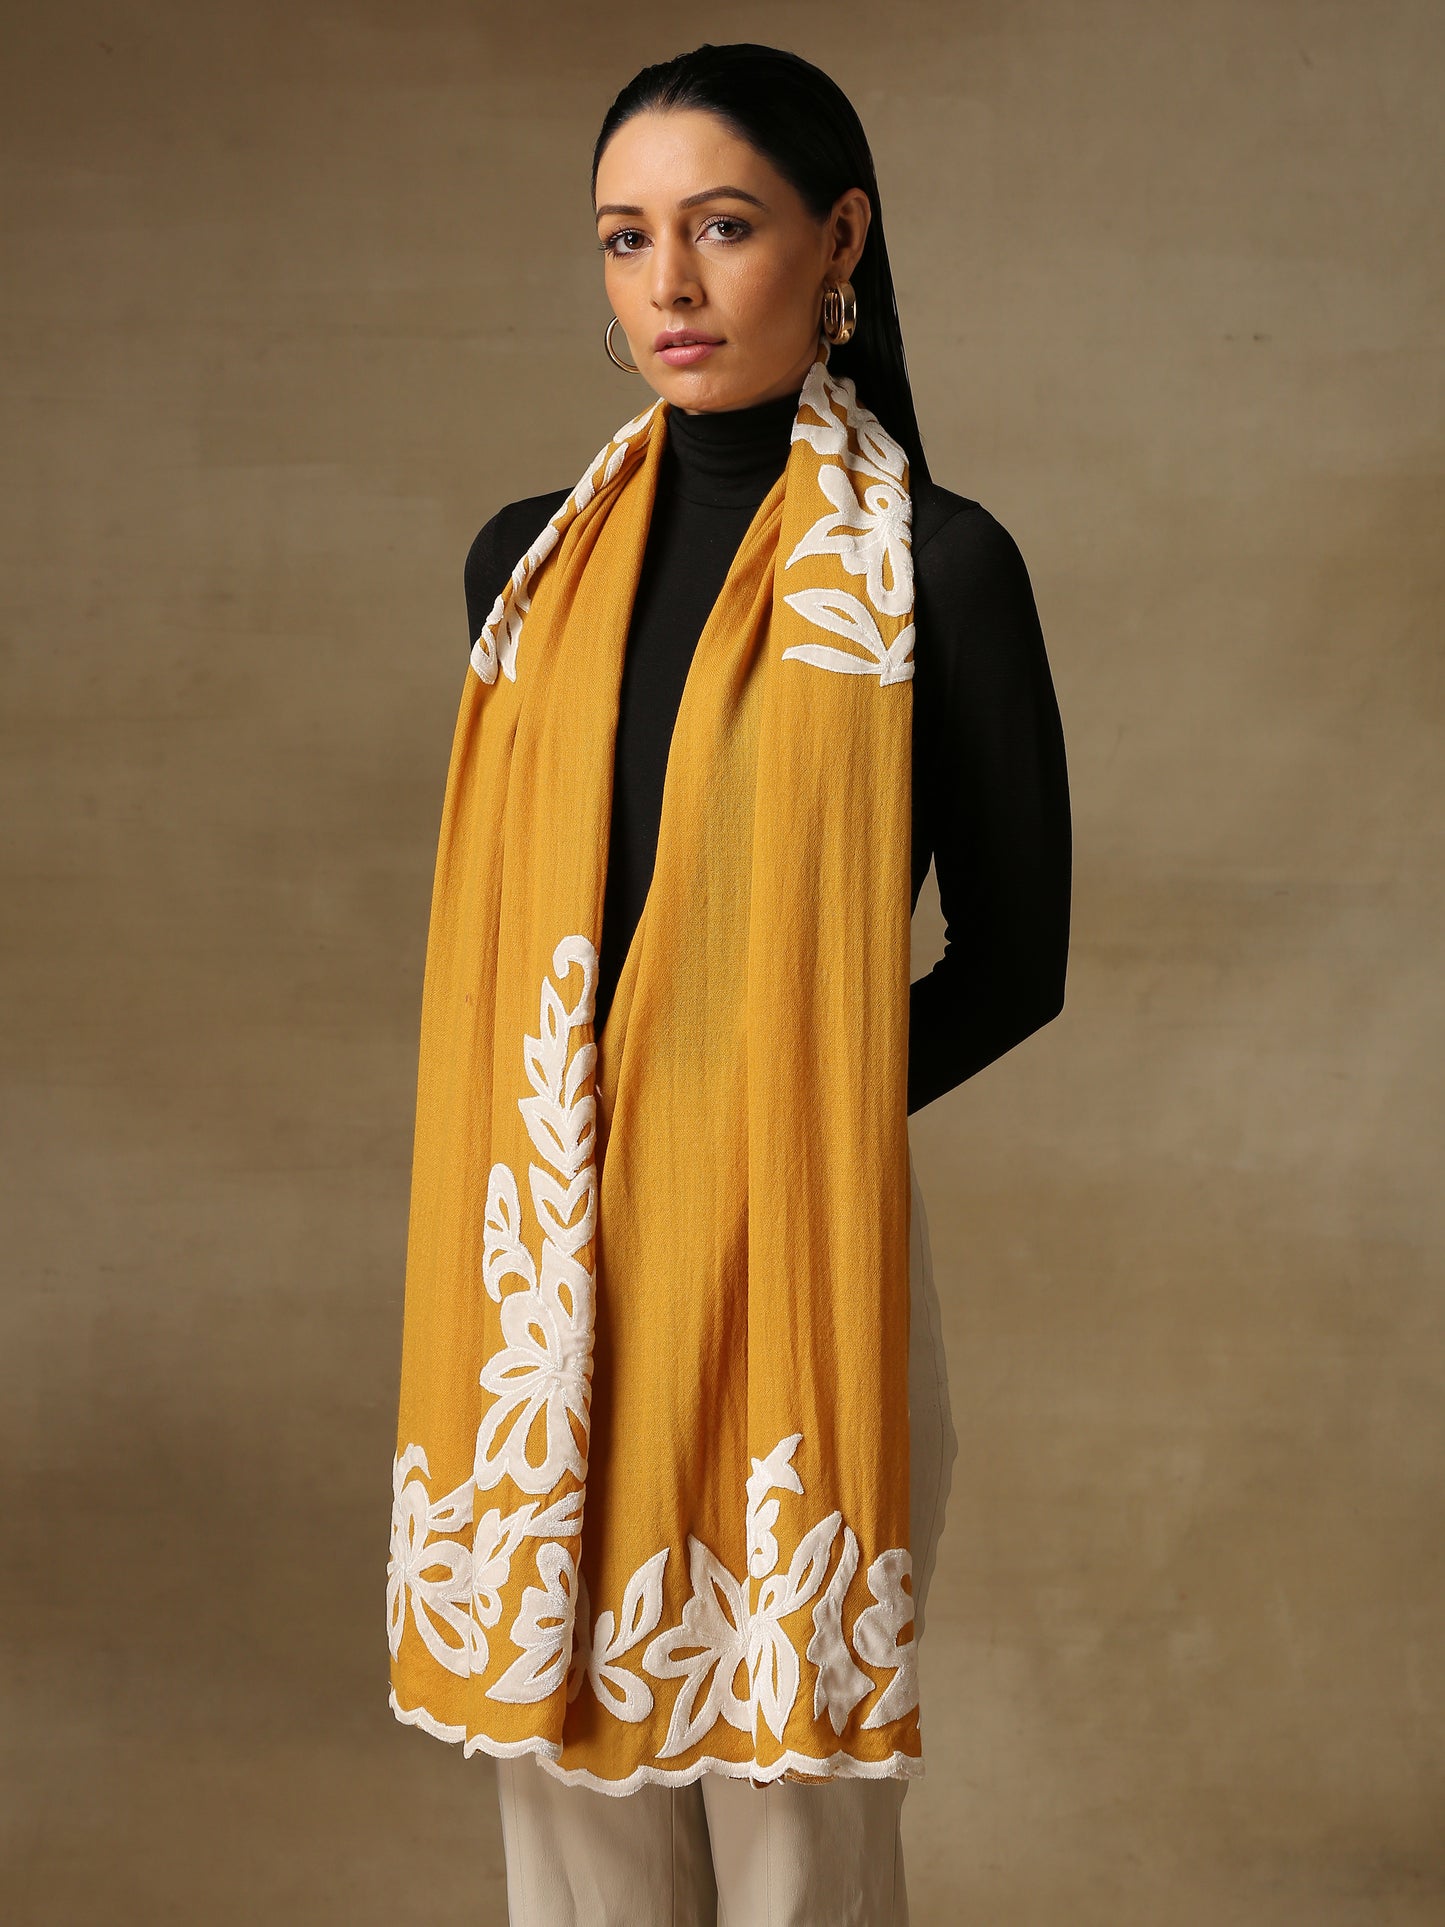 Model is wearing a Velvet Affair stole from Shaza featuring white velvet applique on a mustard coloured cashmere stole. 